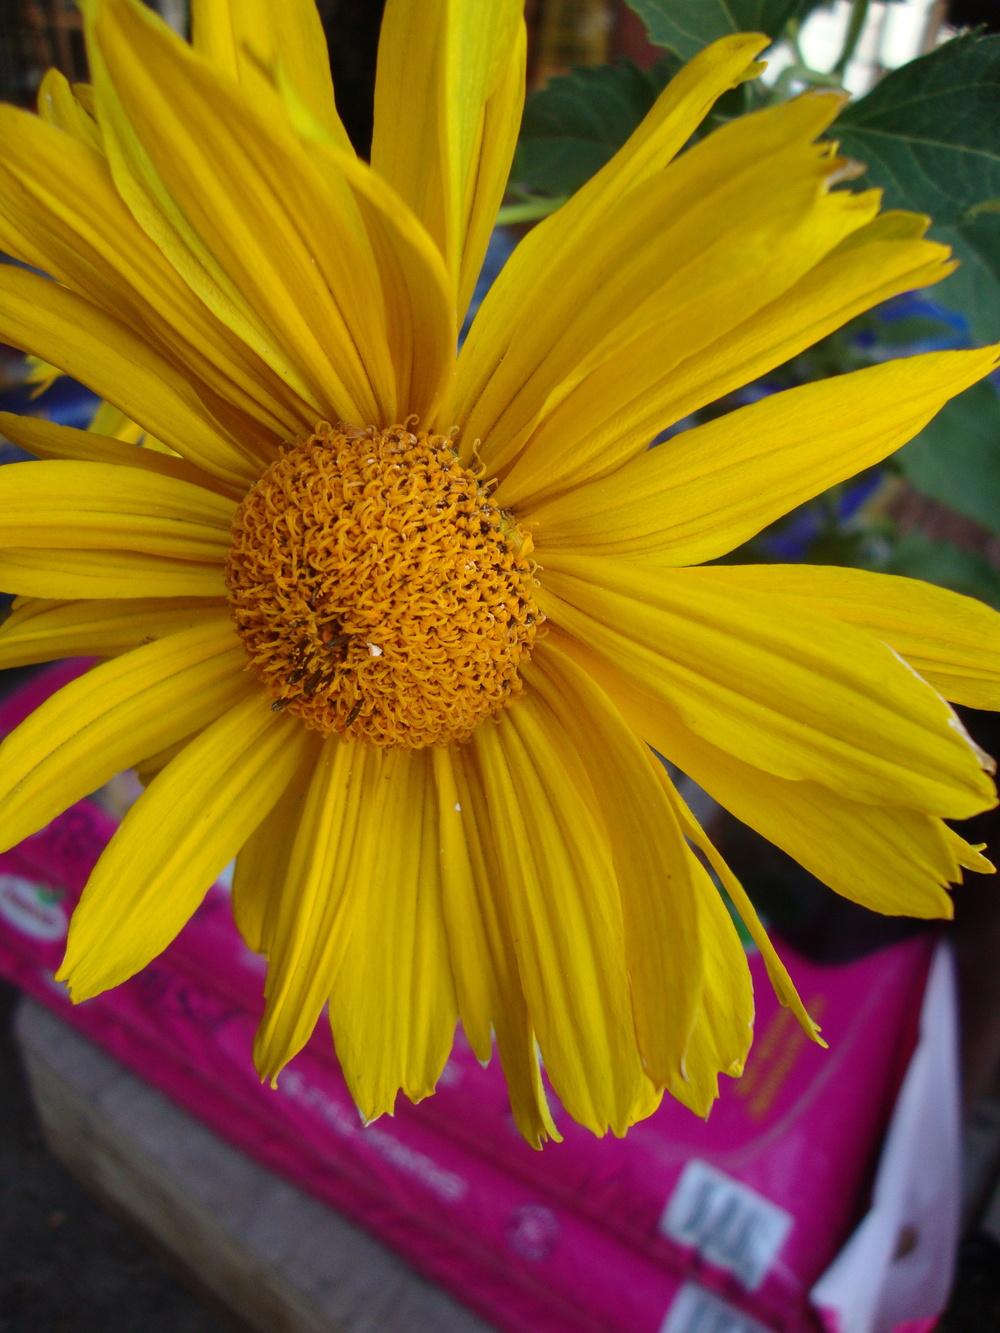 Photo of Oxeye Sunflower (Heliopsis helianthoides var. scabra 'Venus') uploaded by Paul2032